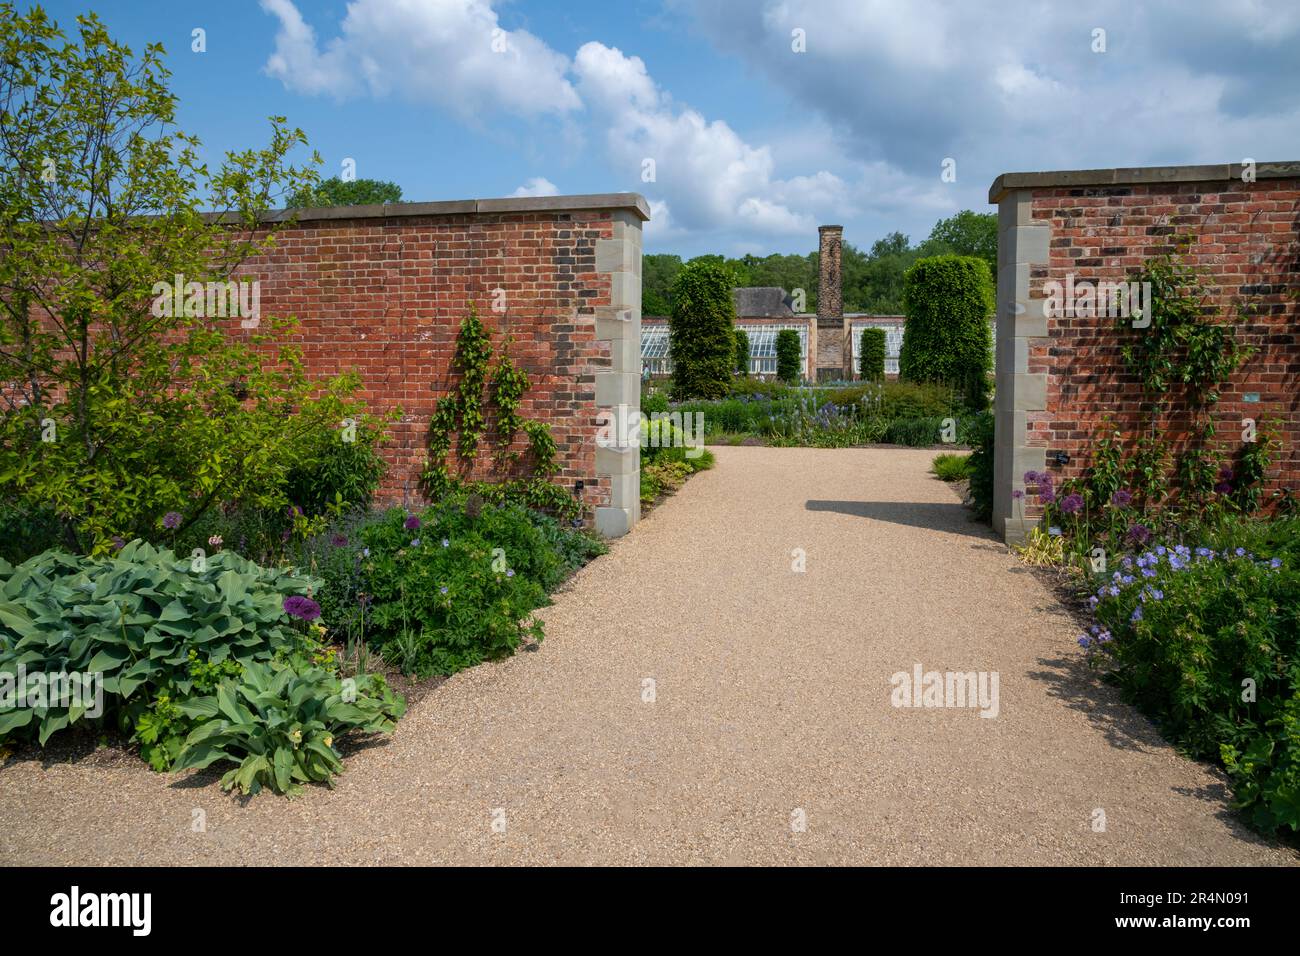 Entrance to the Paradise Garden at RHS Bridgewater, Worsley Greater Manchester, England. Stock Photo